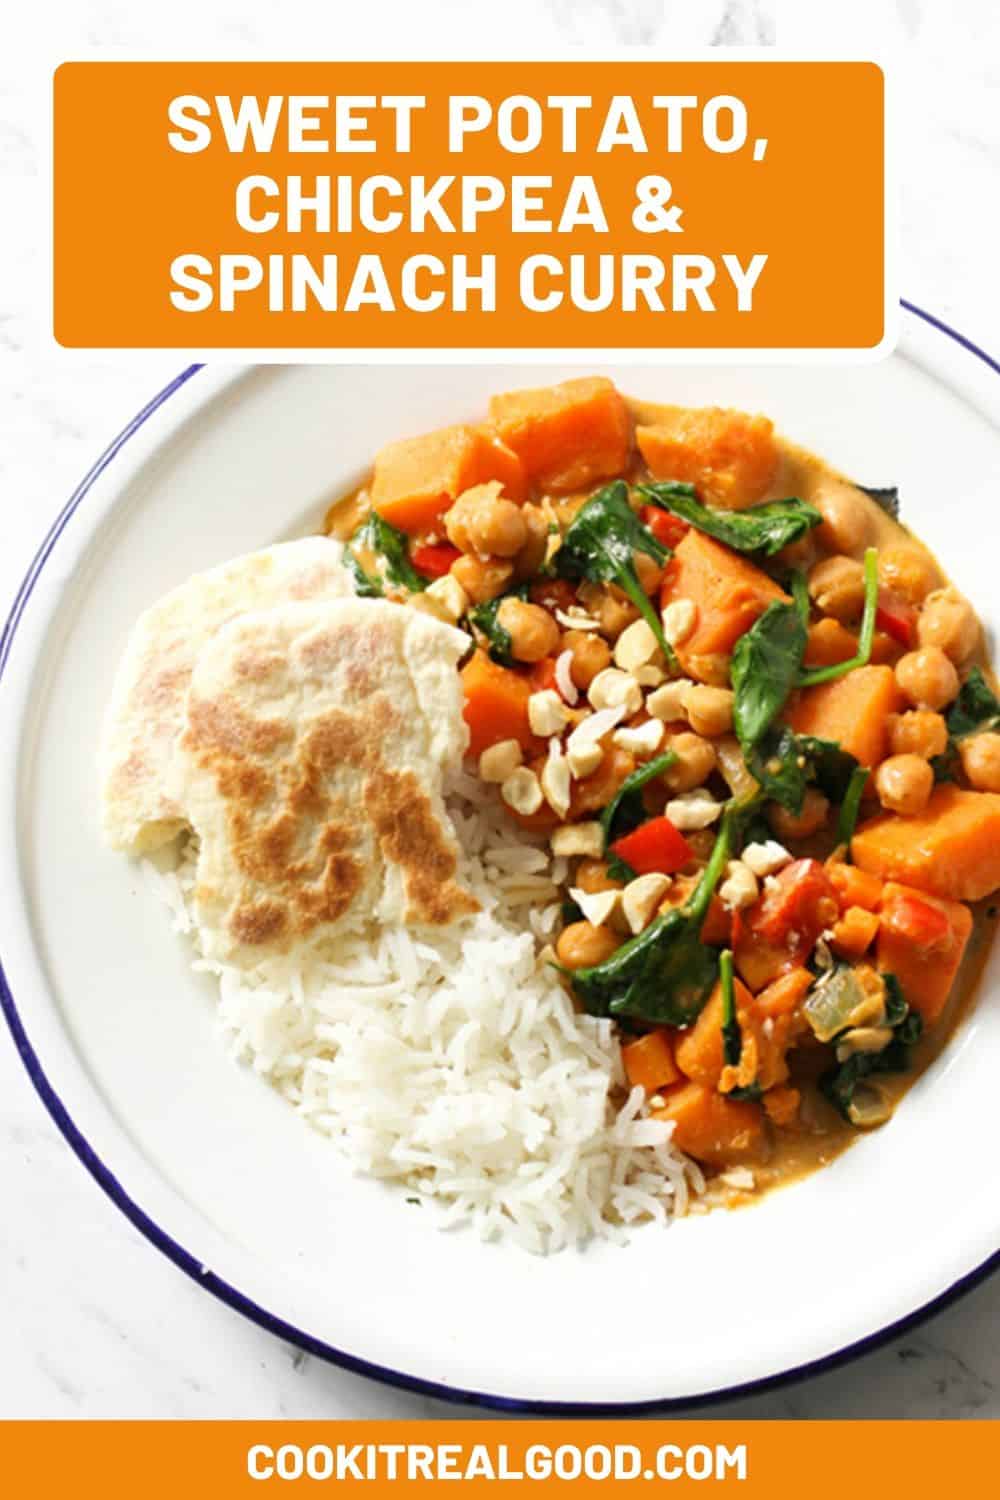 Sweet Potato, Chickpea and Spinach Curry Recipe | Cook It Real Good